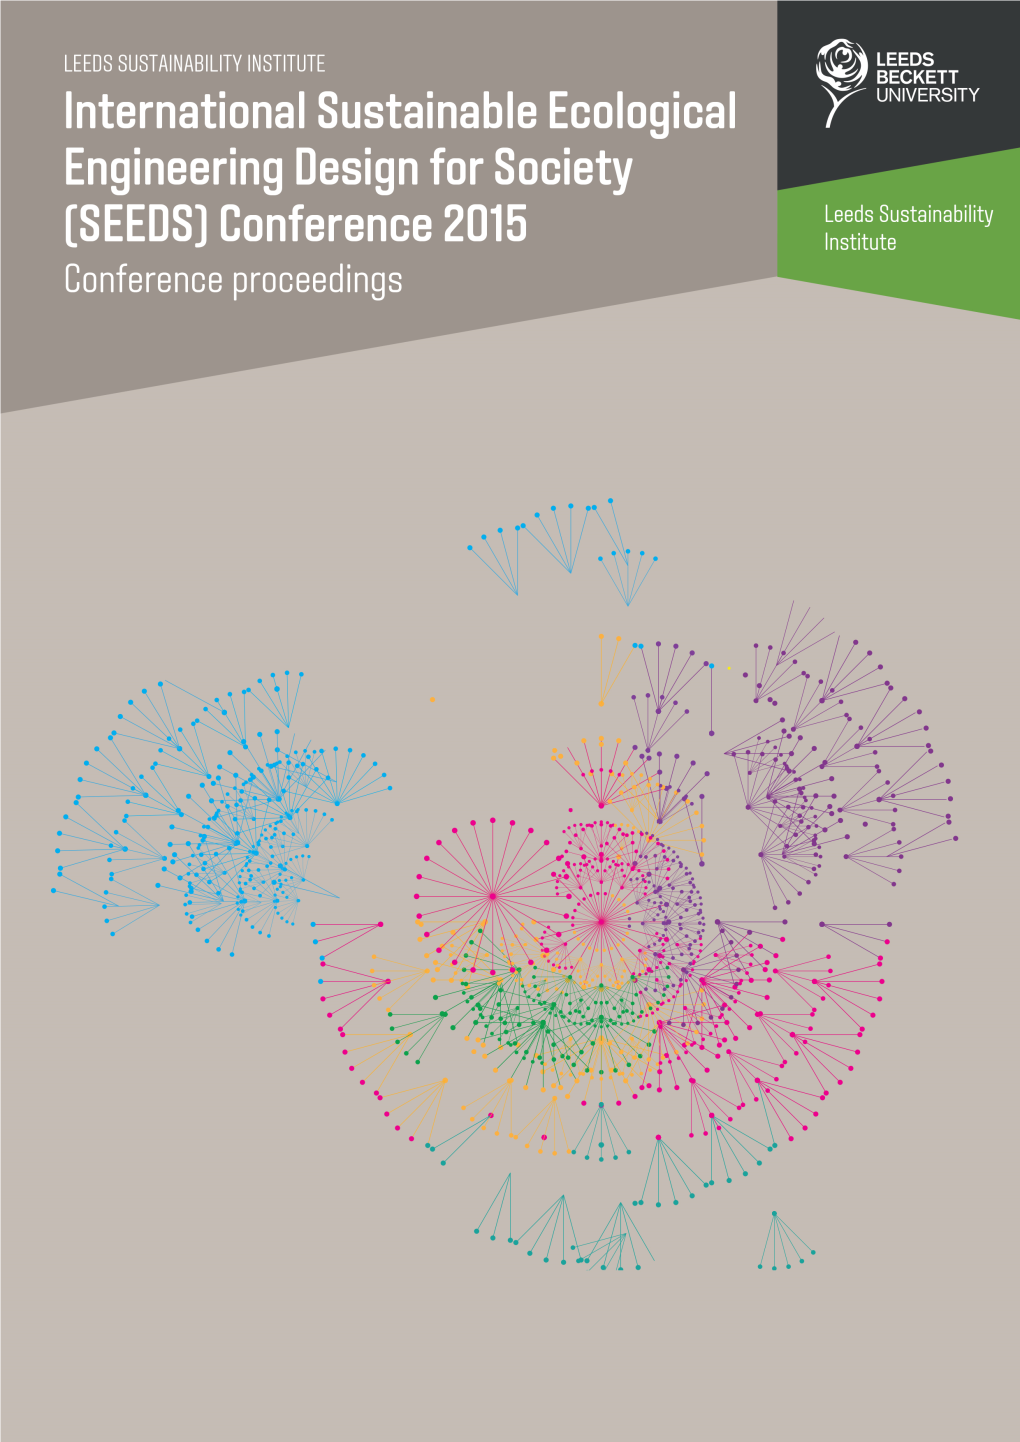 SEEDS Conference Proceedings 2015